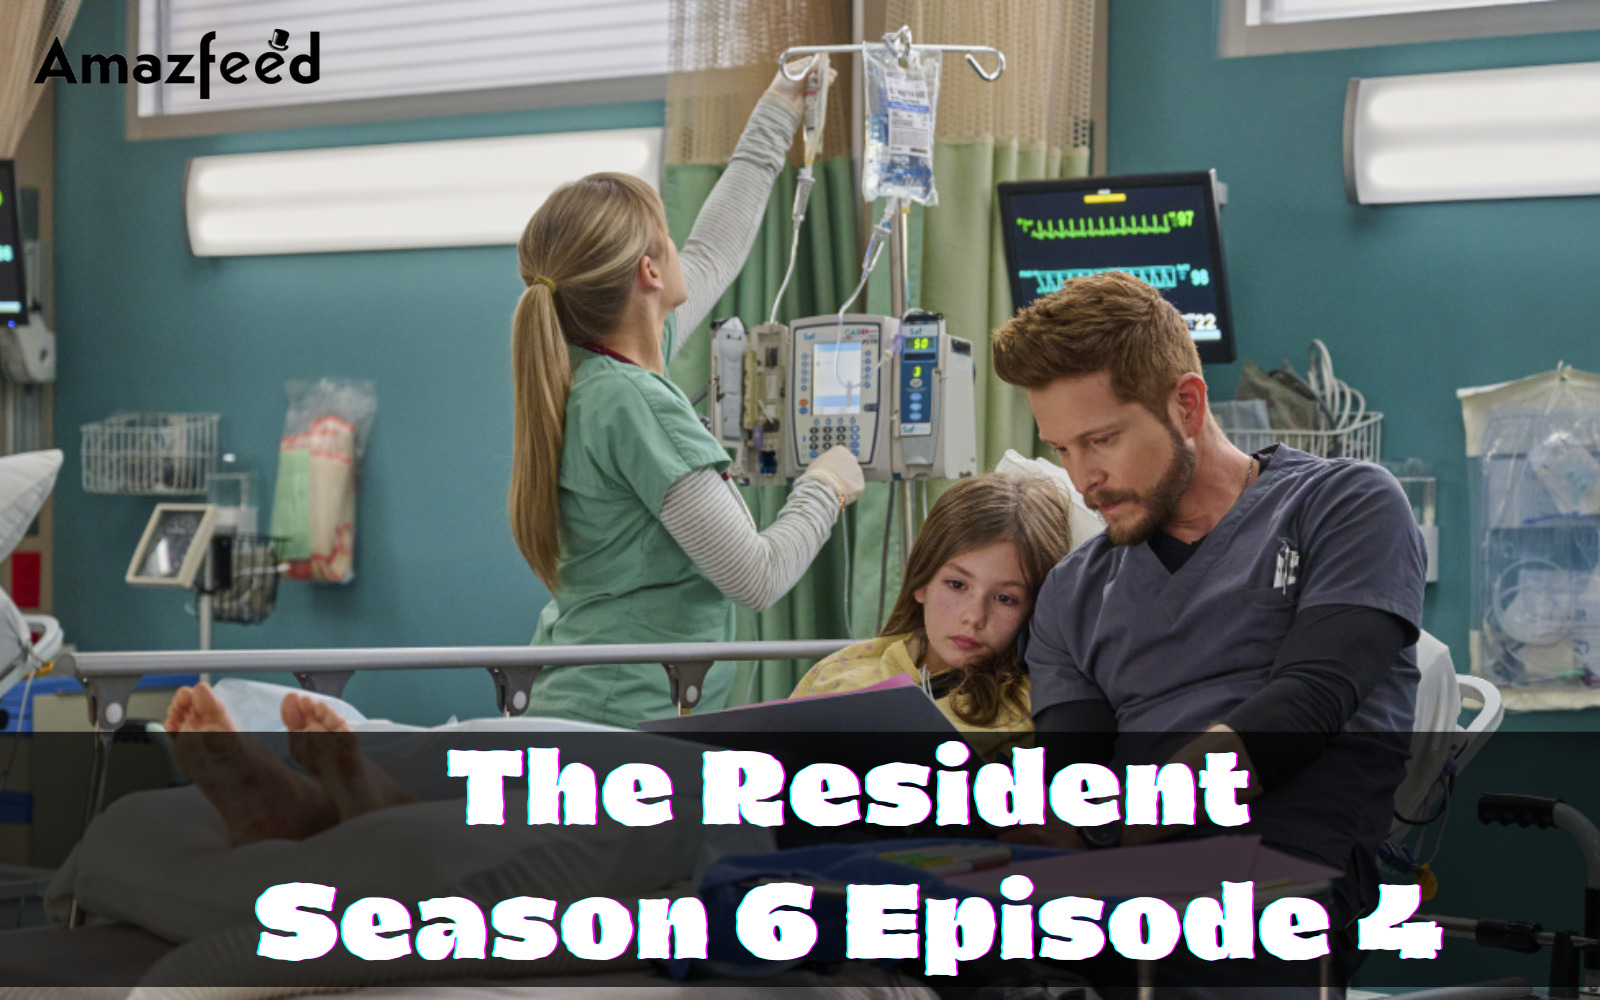 The Resident Season 6 Episode 4 Premiere Time in different time zones